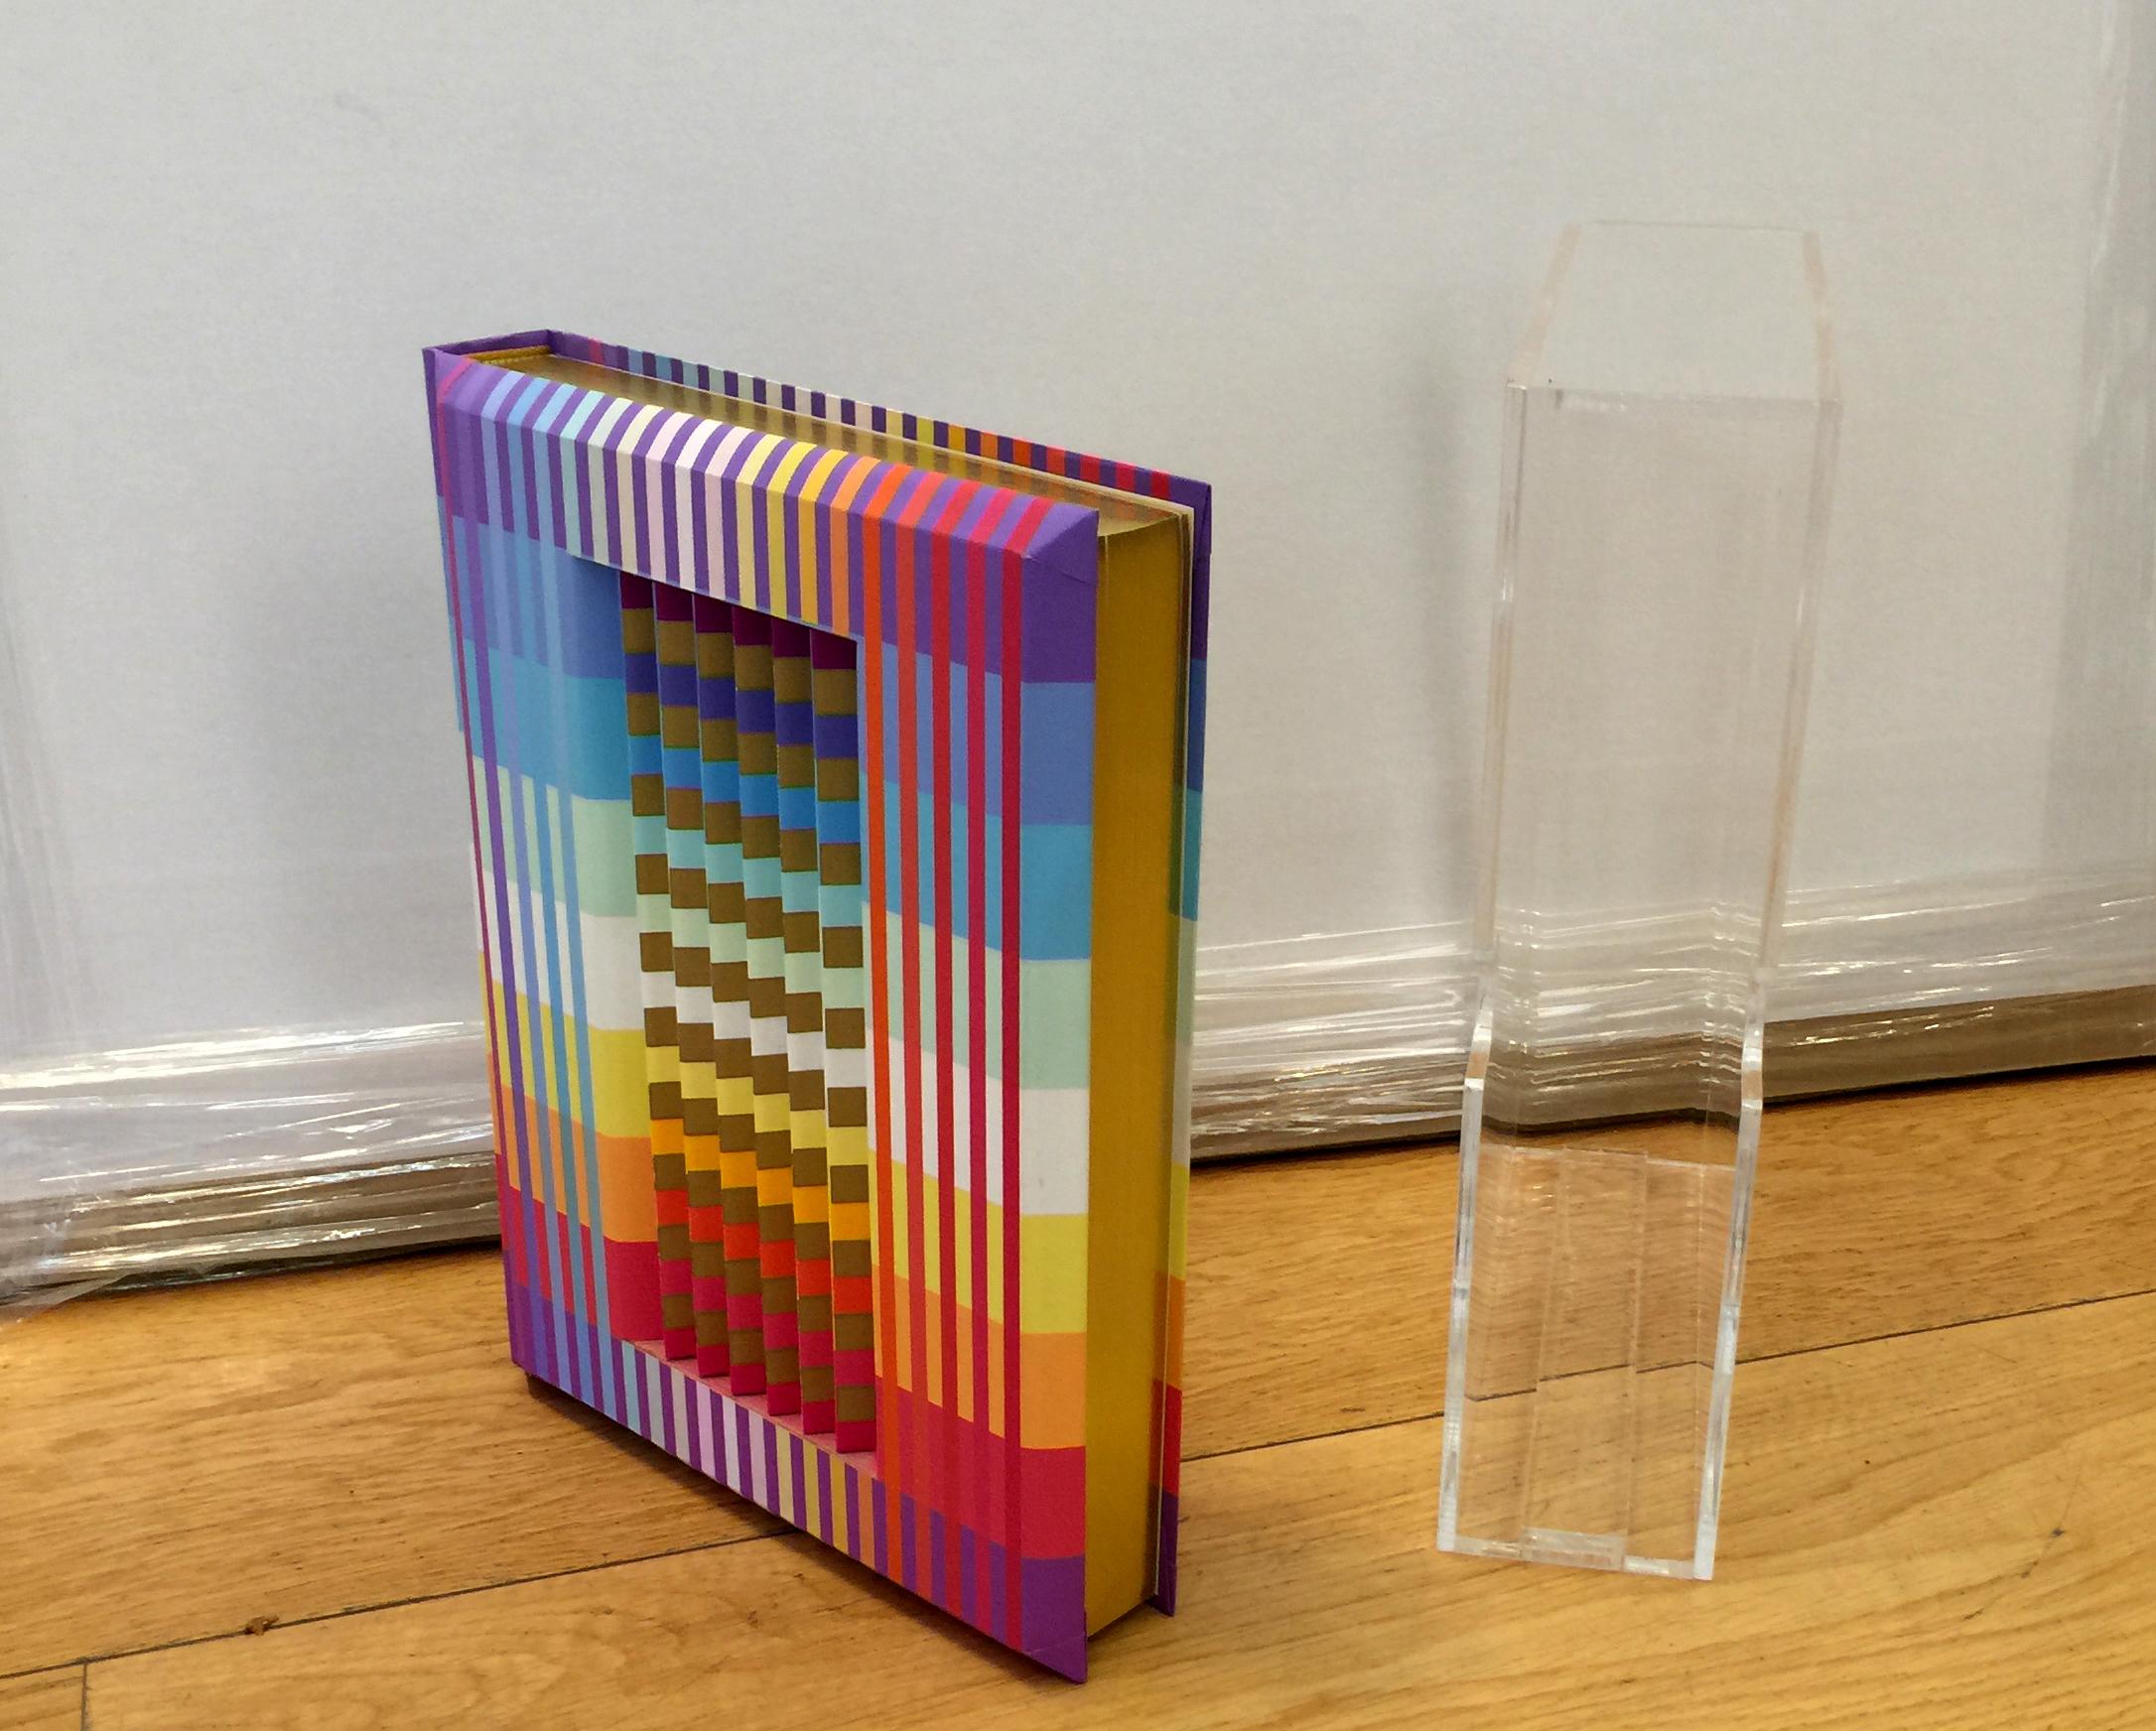 The five books of the Torah, the jewish Bible, with linear english translation.
The limited-edition cover was created in 1992 by the internationally renowned artist, Yaacov Agam.

Printed with Gefen printhouse/
It has on its front a Polymorph